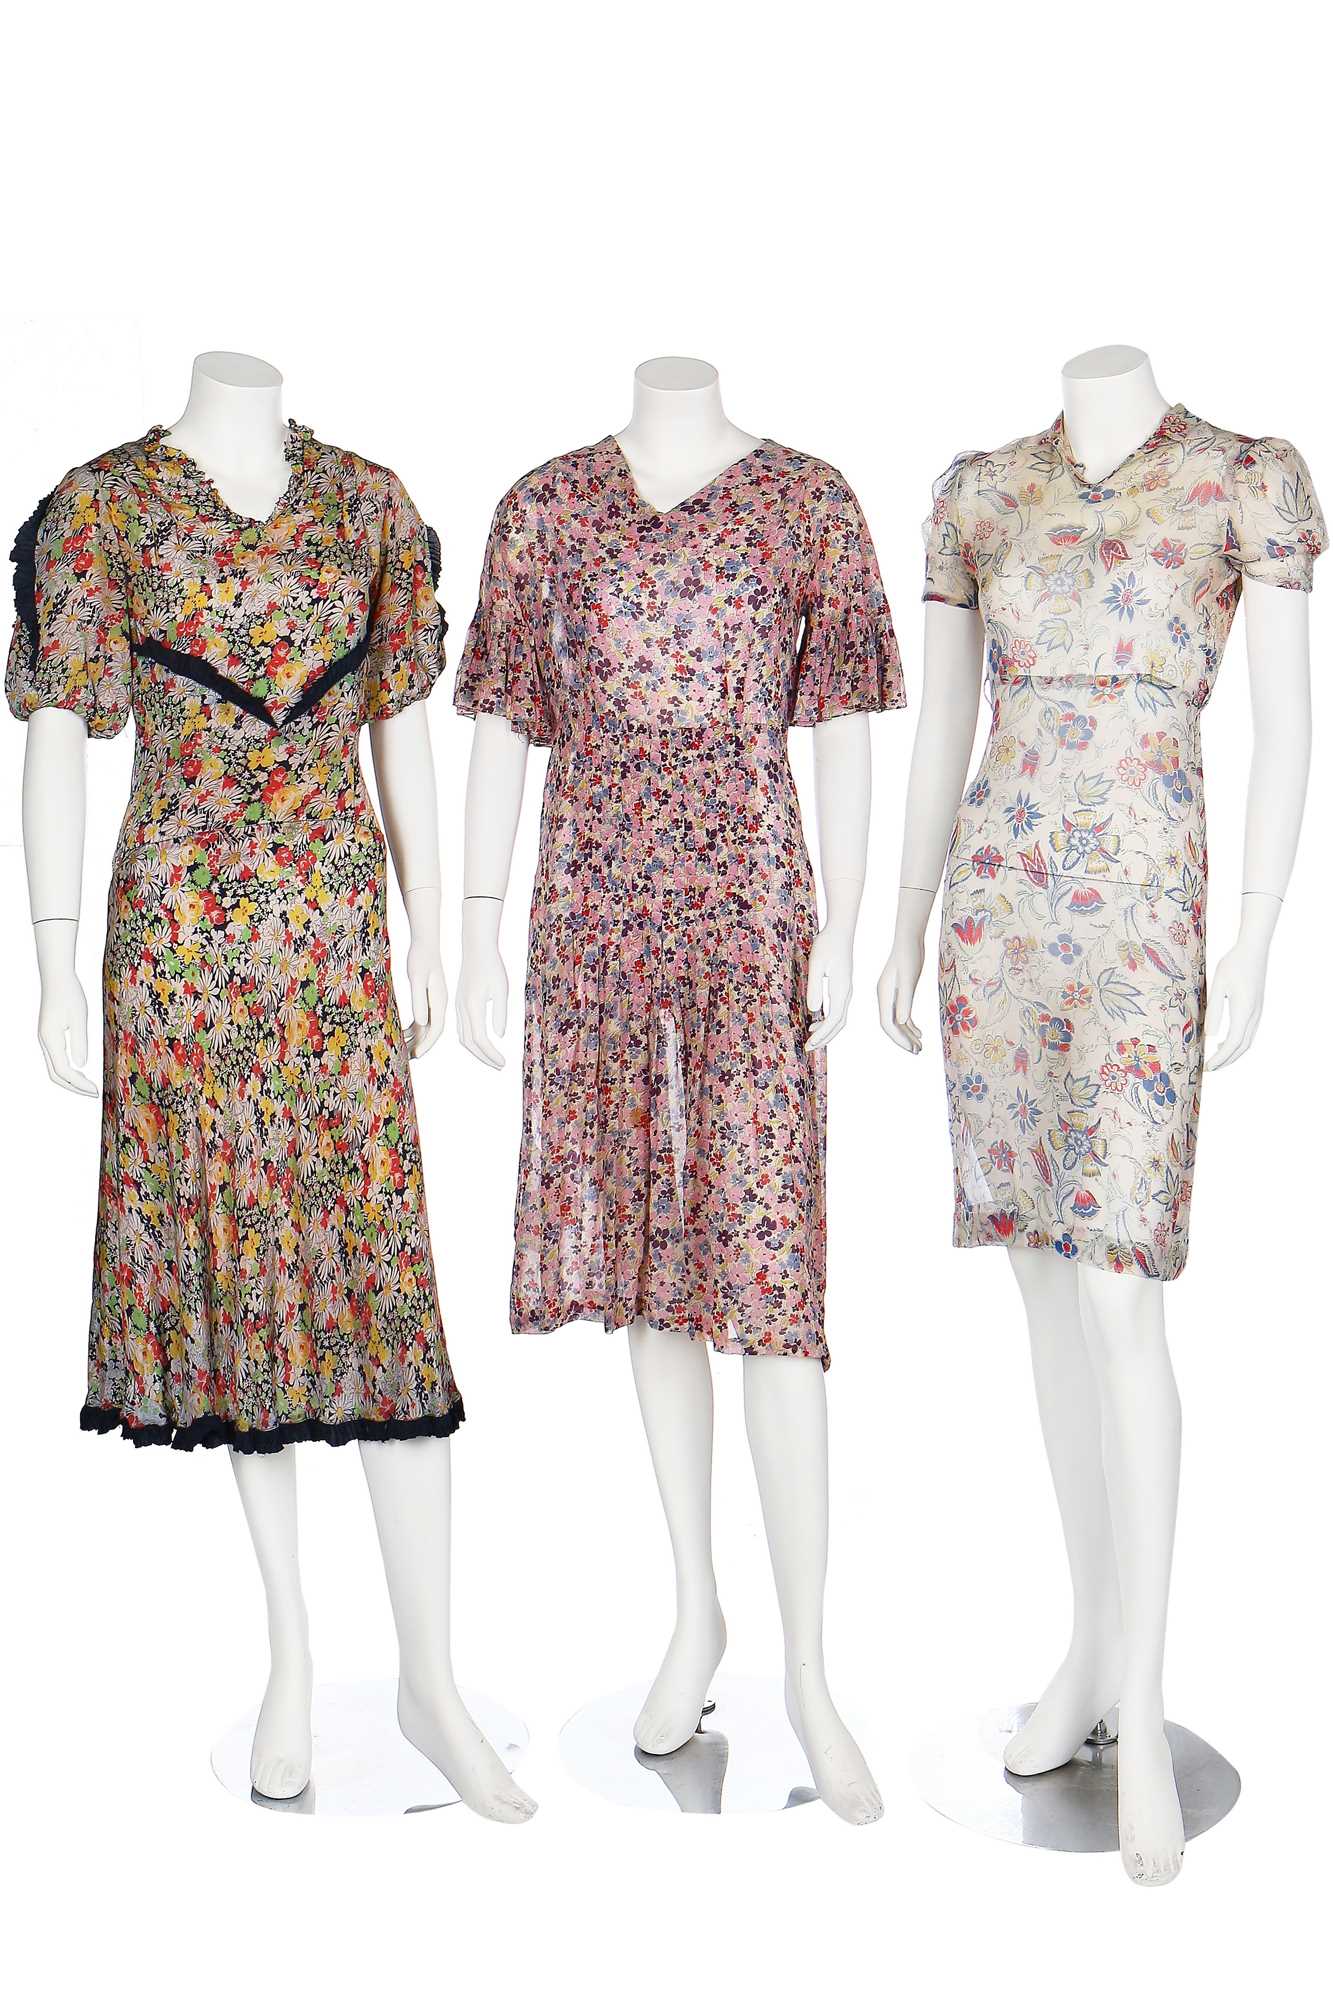 Lot 51 - Eleven summer day dresses, 1930s,